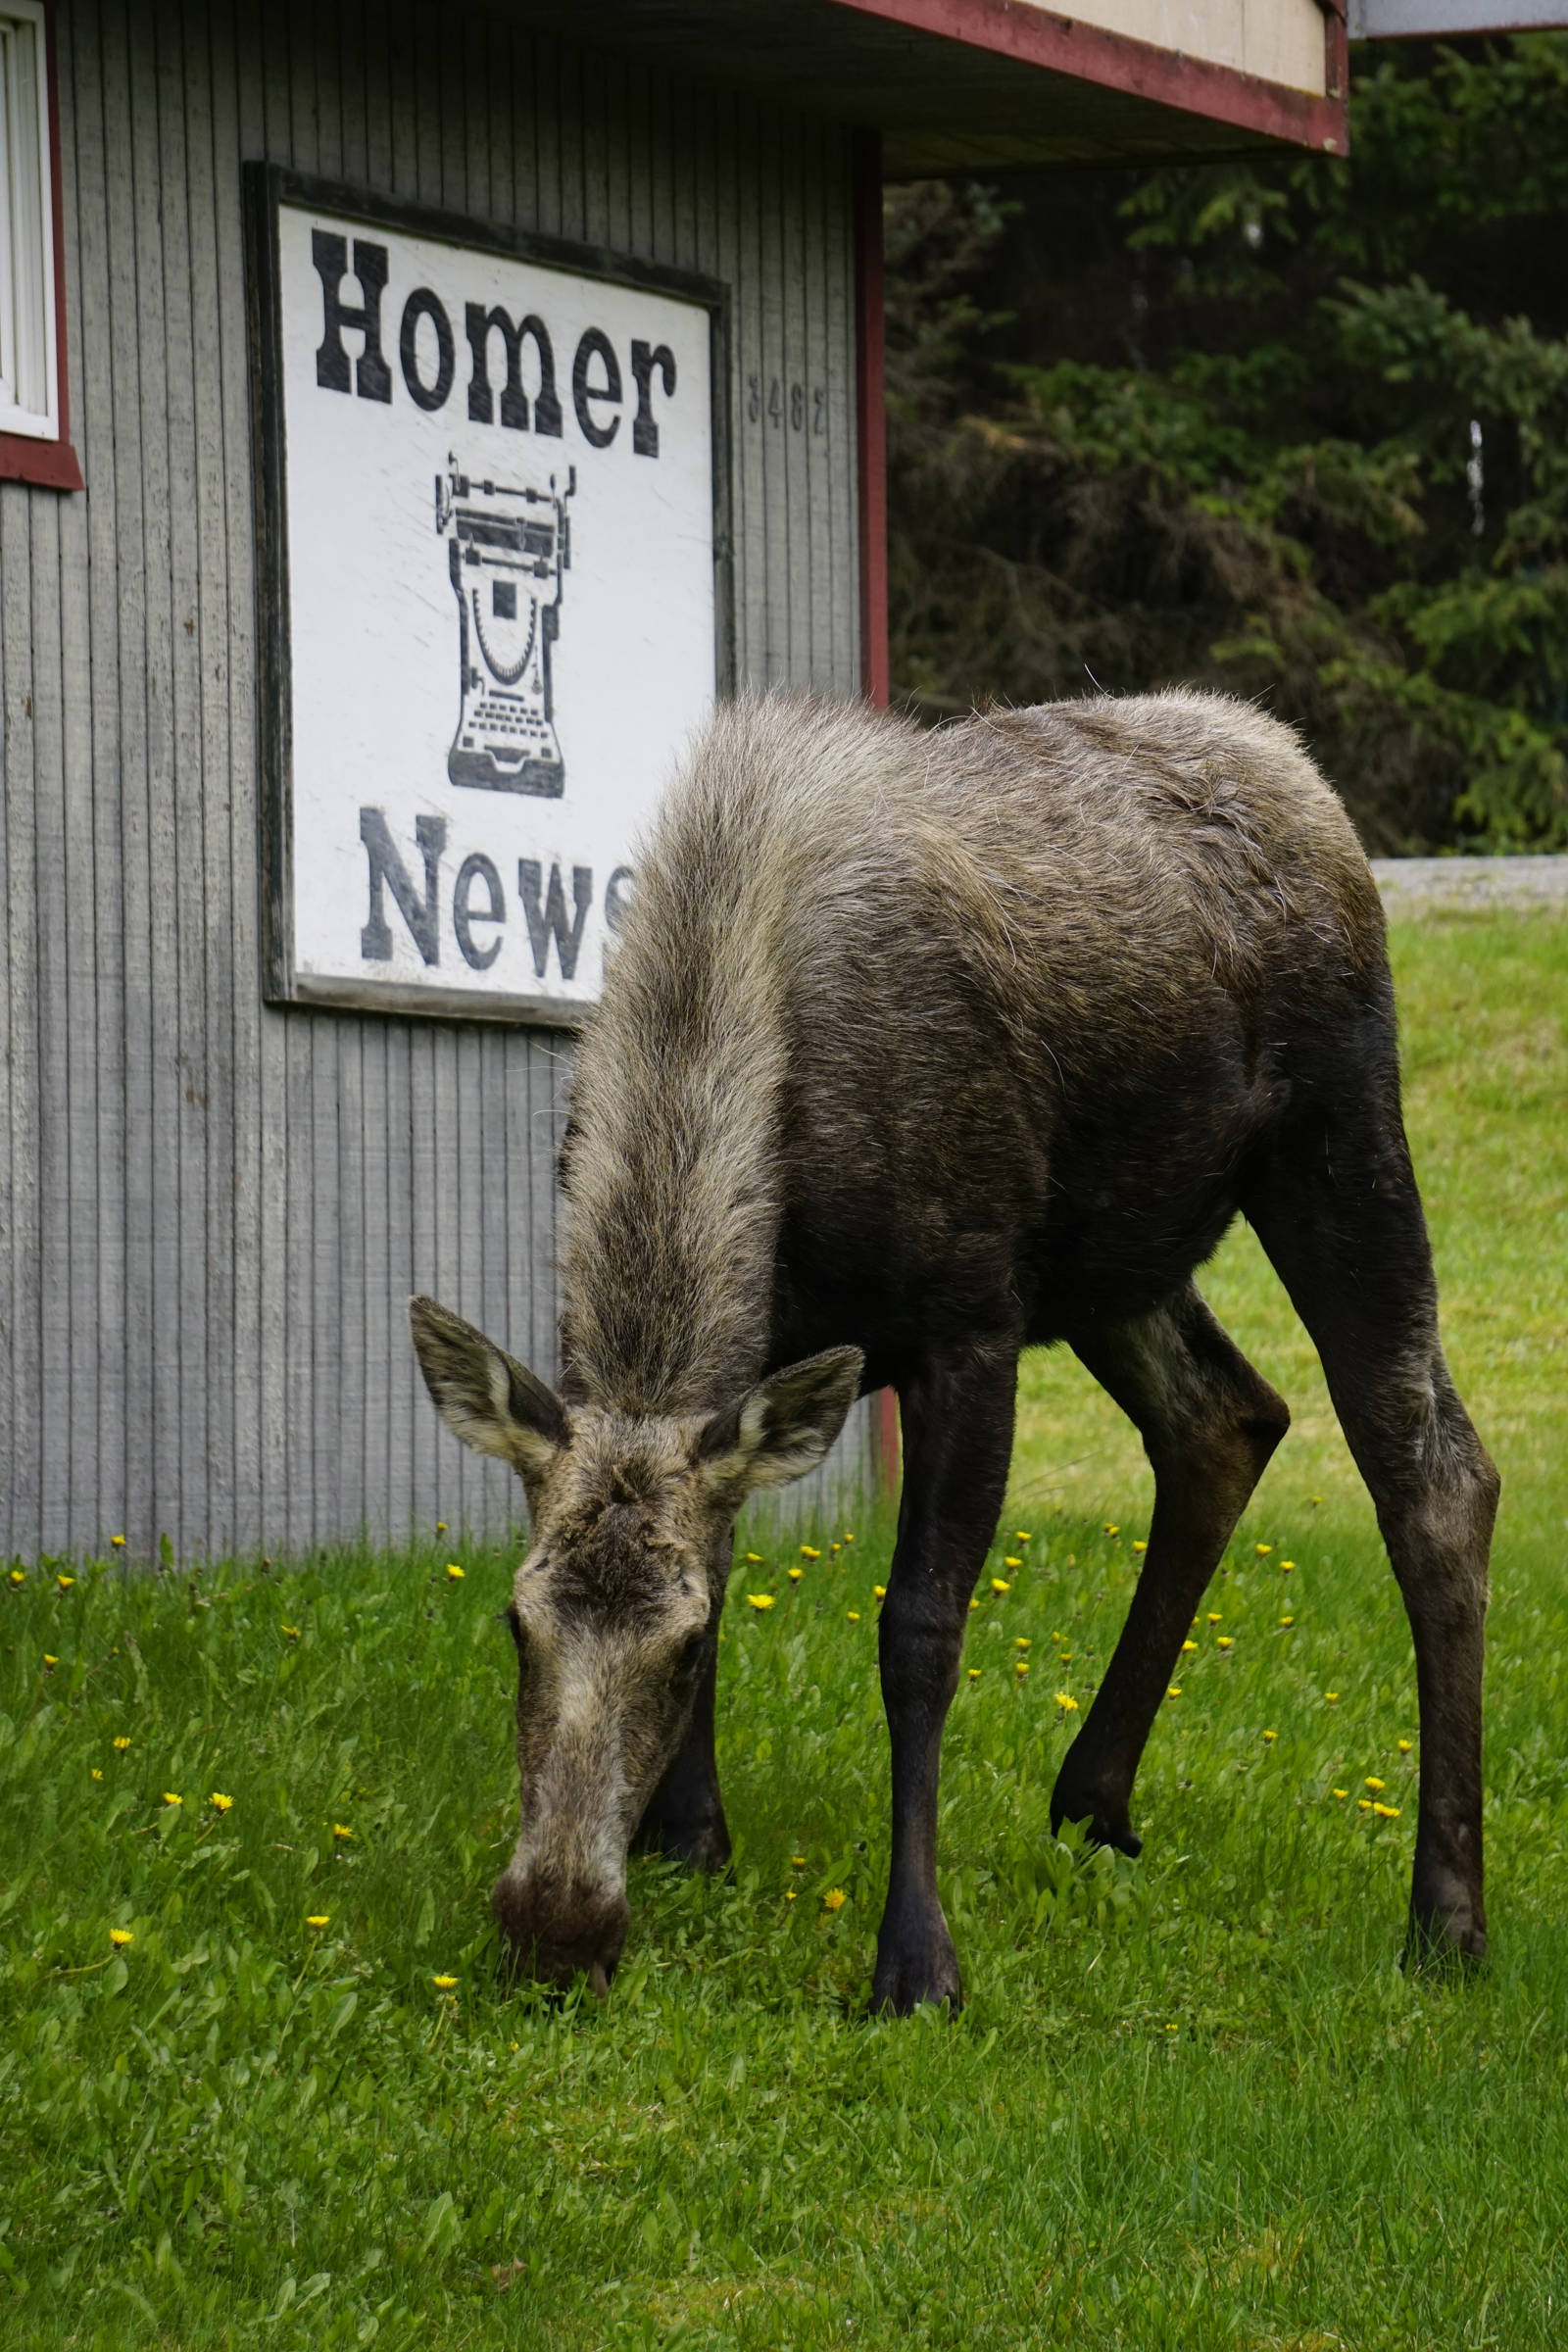 Nature’s own lawn service                                A moose browses on the grass of the Homer News on May 15, 2019, in Homer, Alaska. (Photo by Michael Armstrong/Homer News)